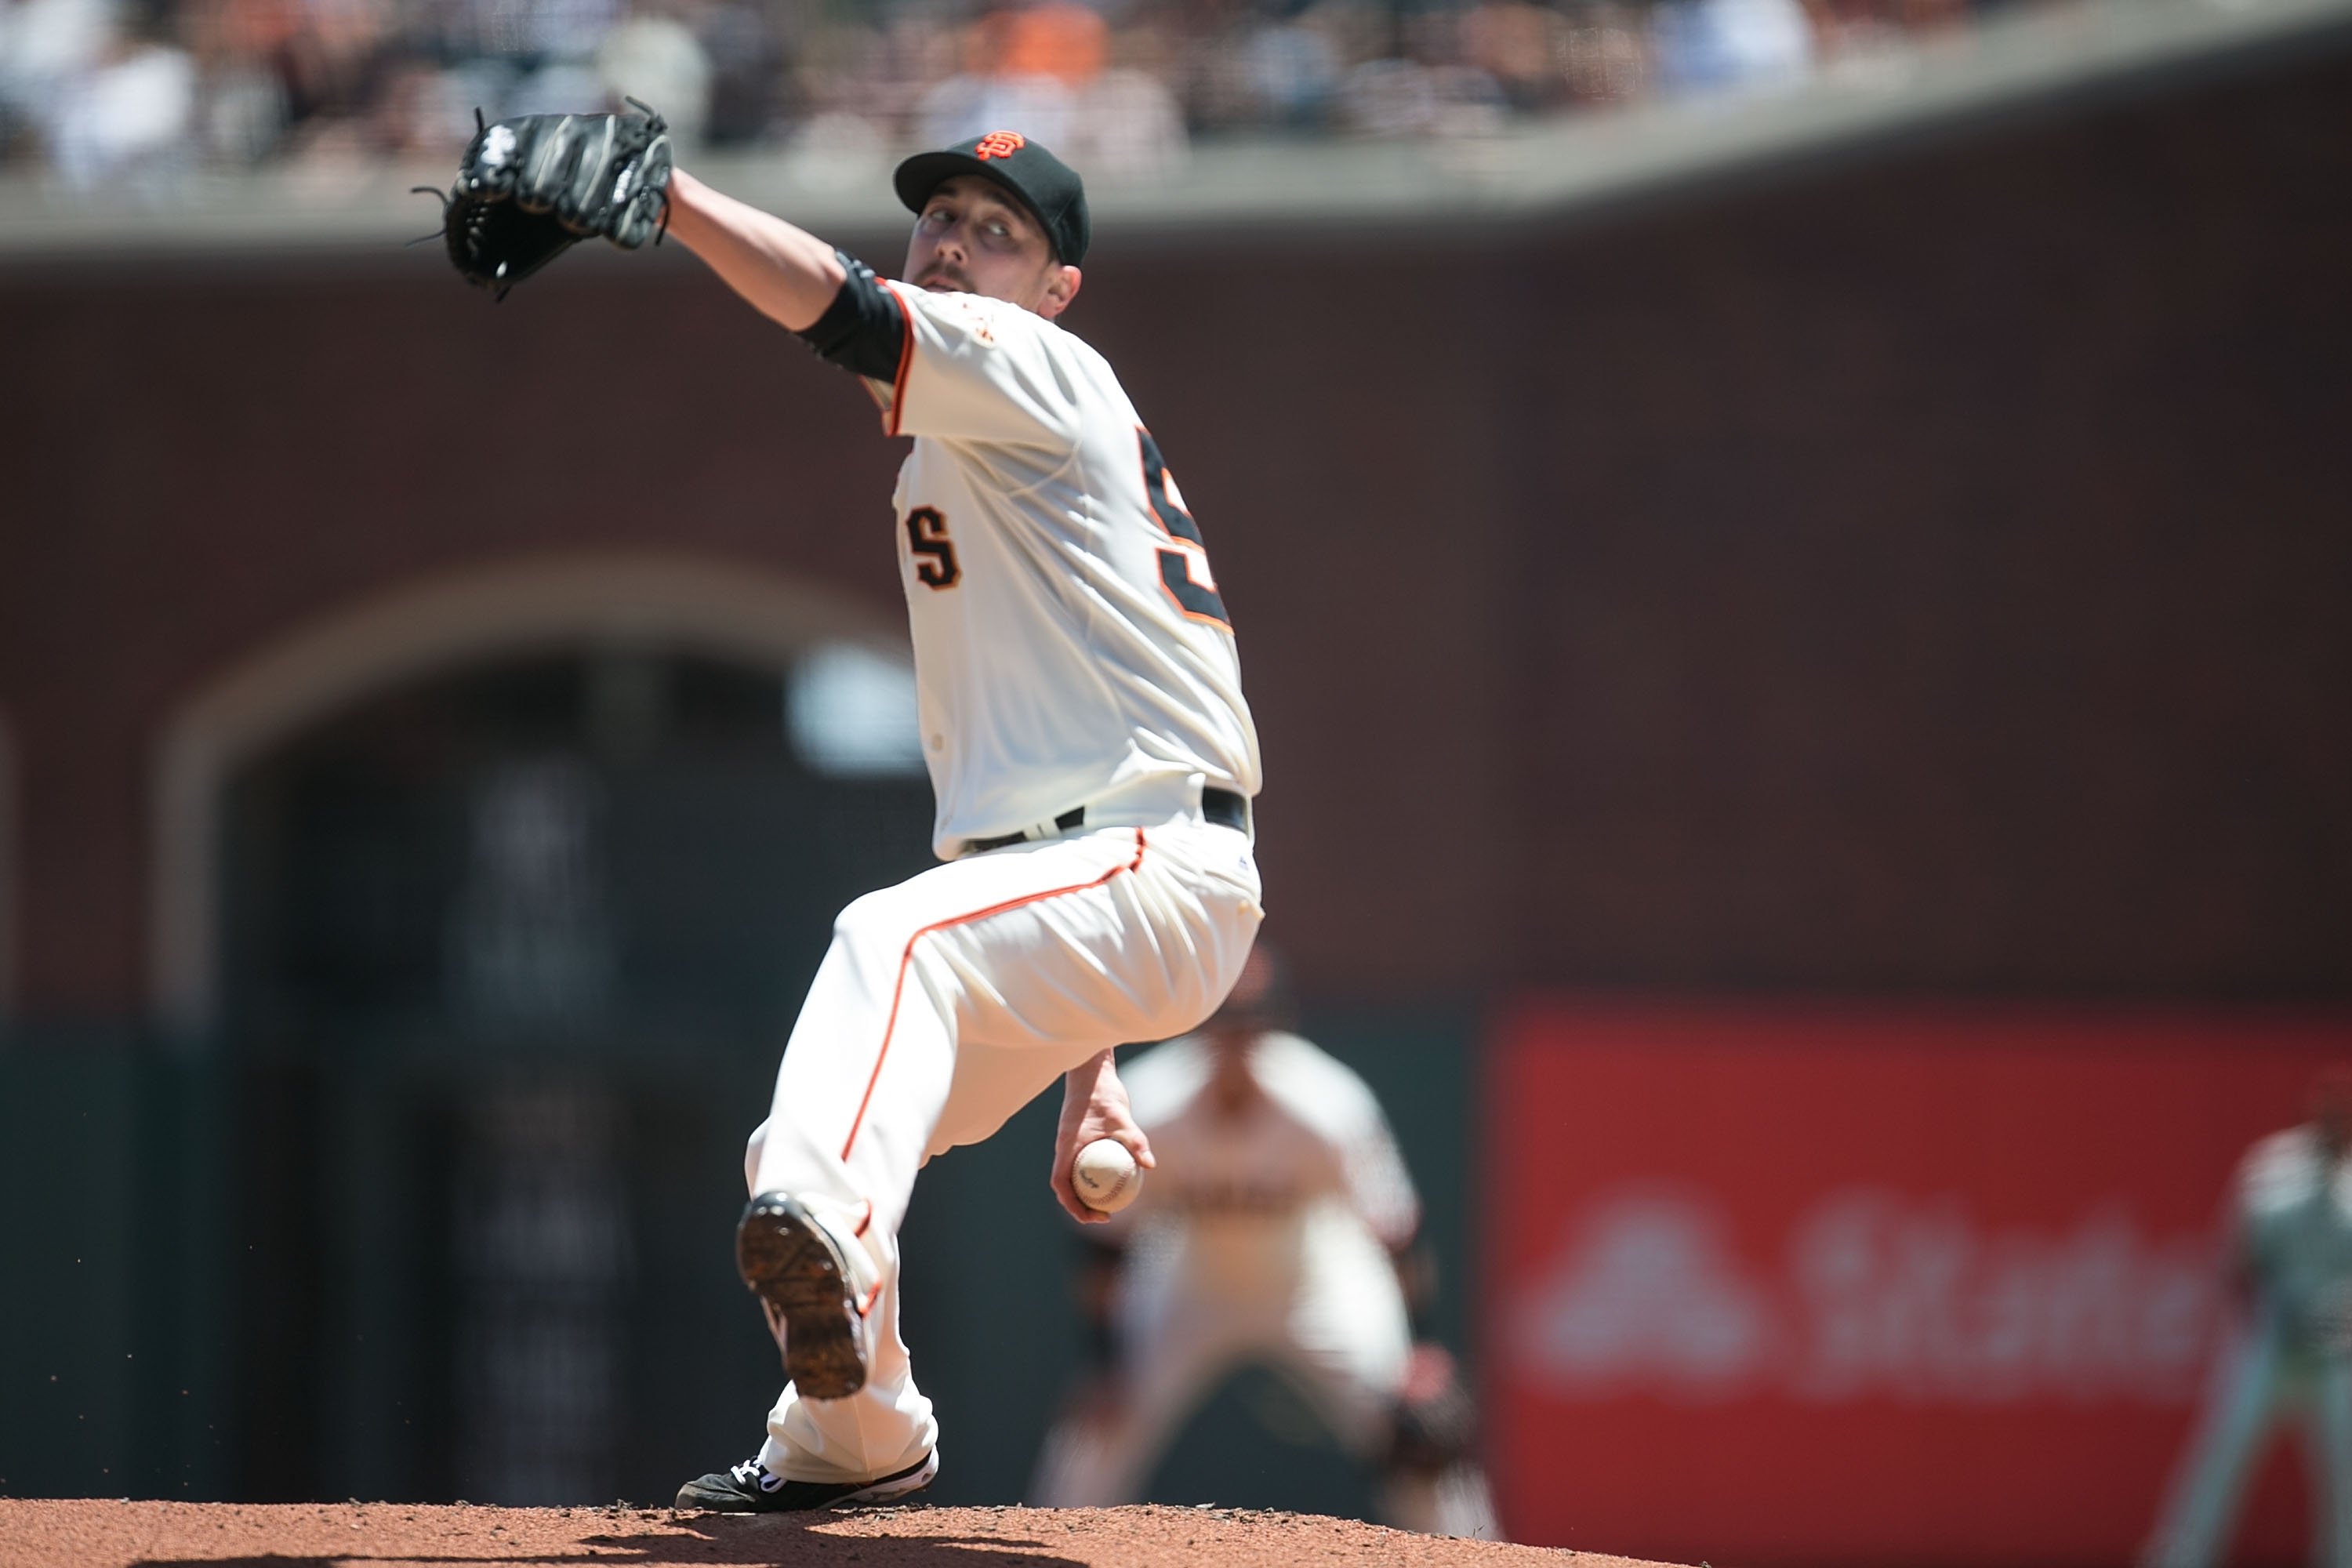 Giants' Tim Lincecum throws no-hitter against Padres - Los Angeles Times